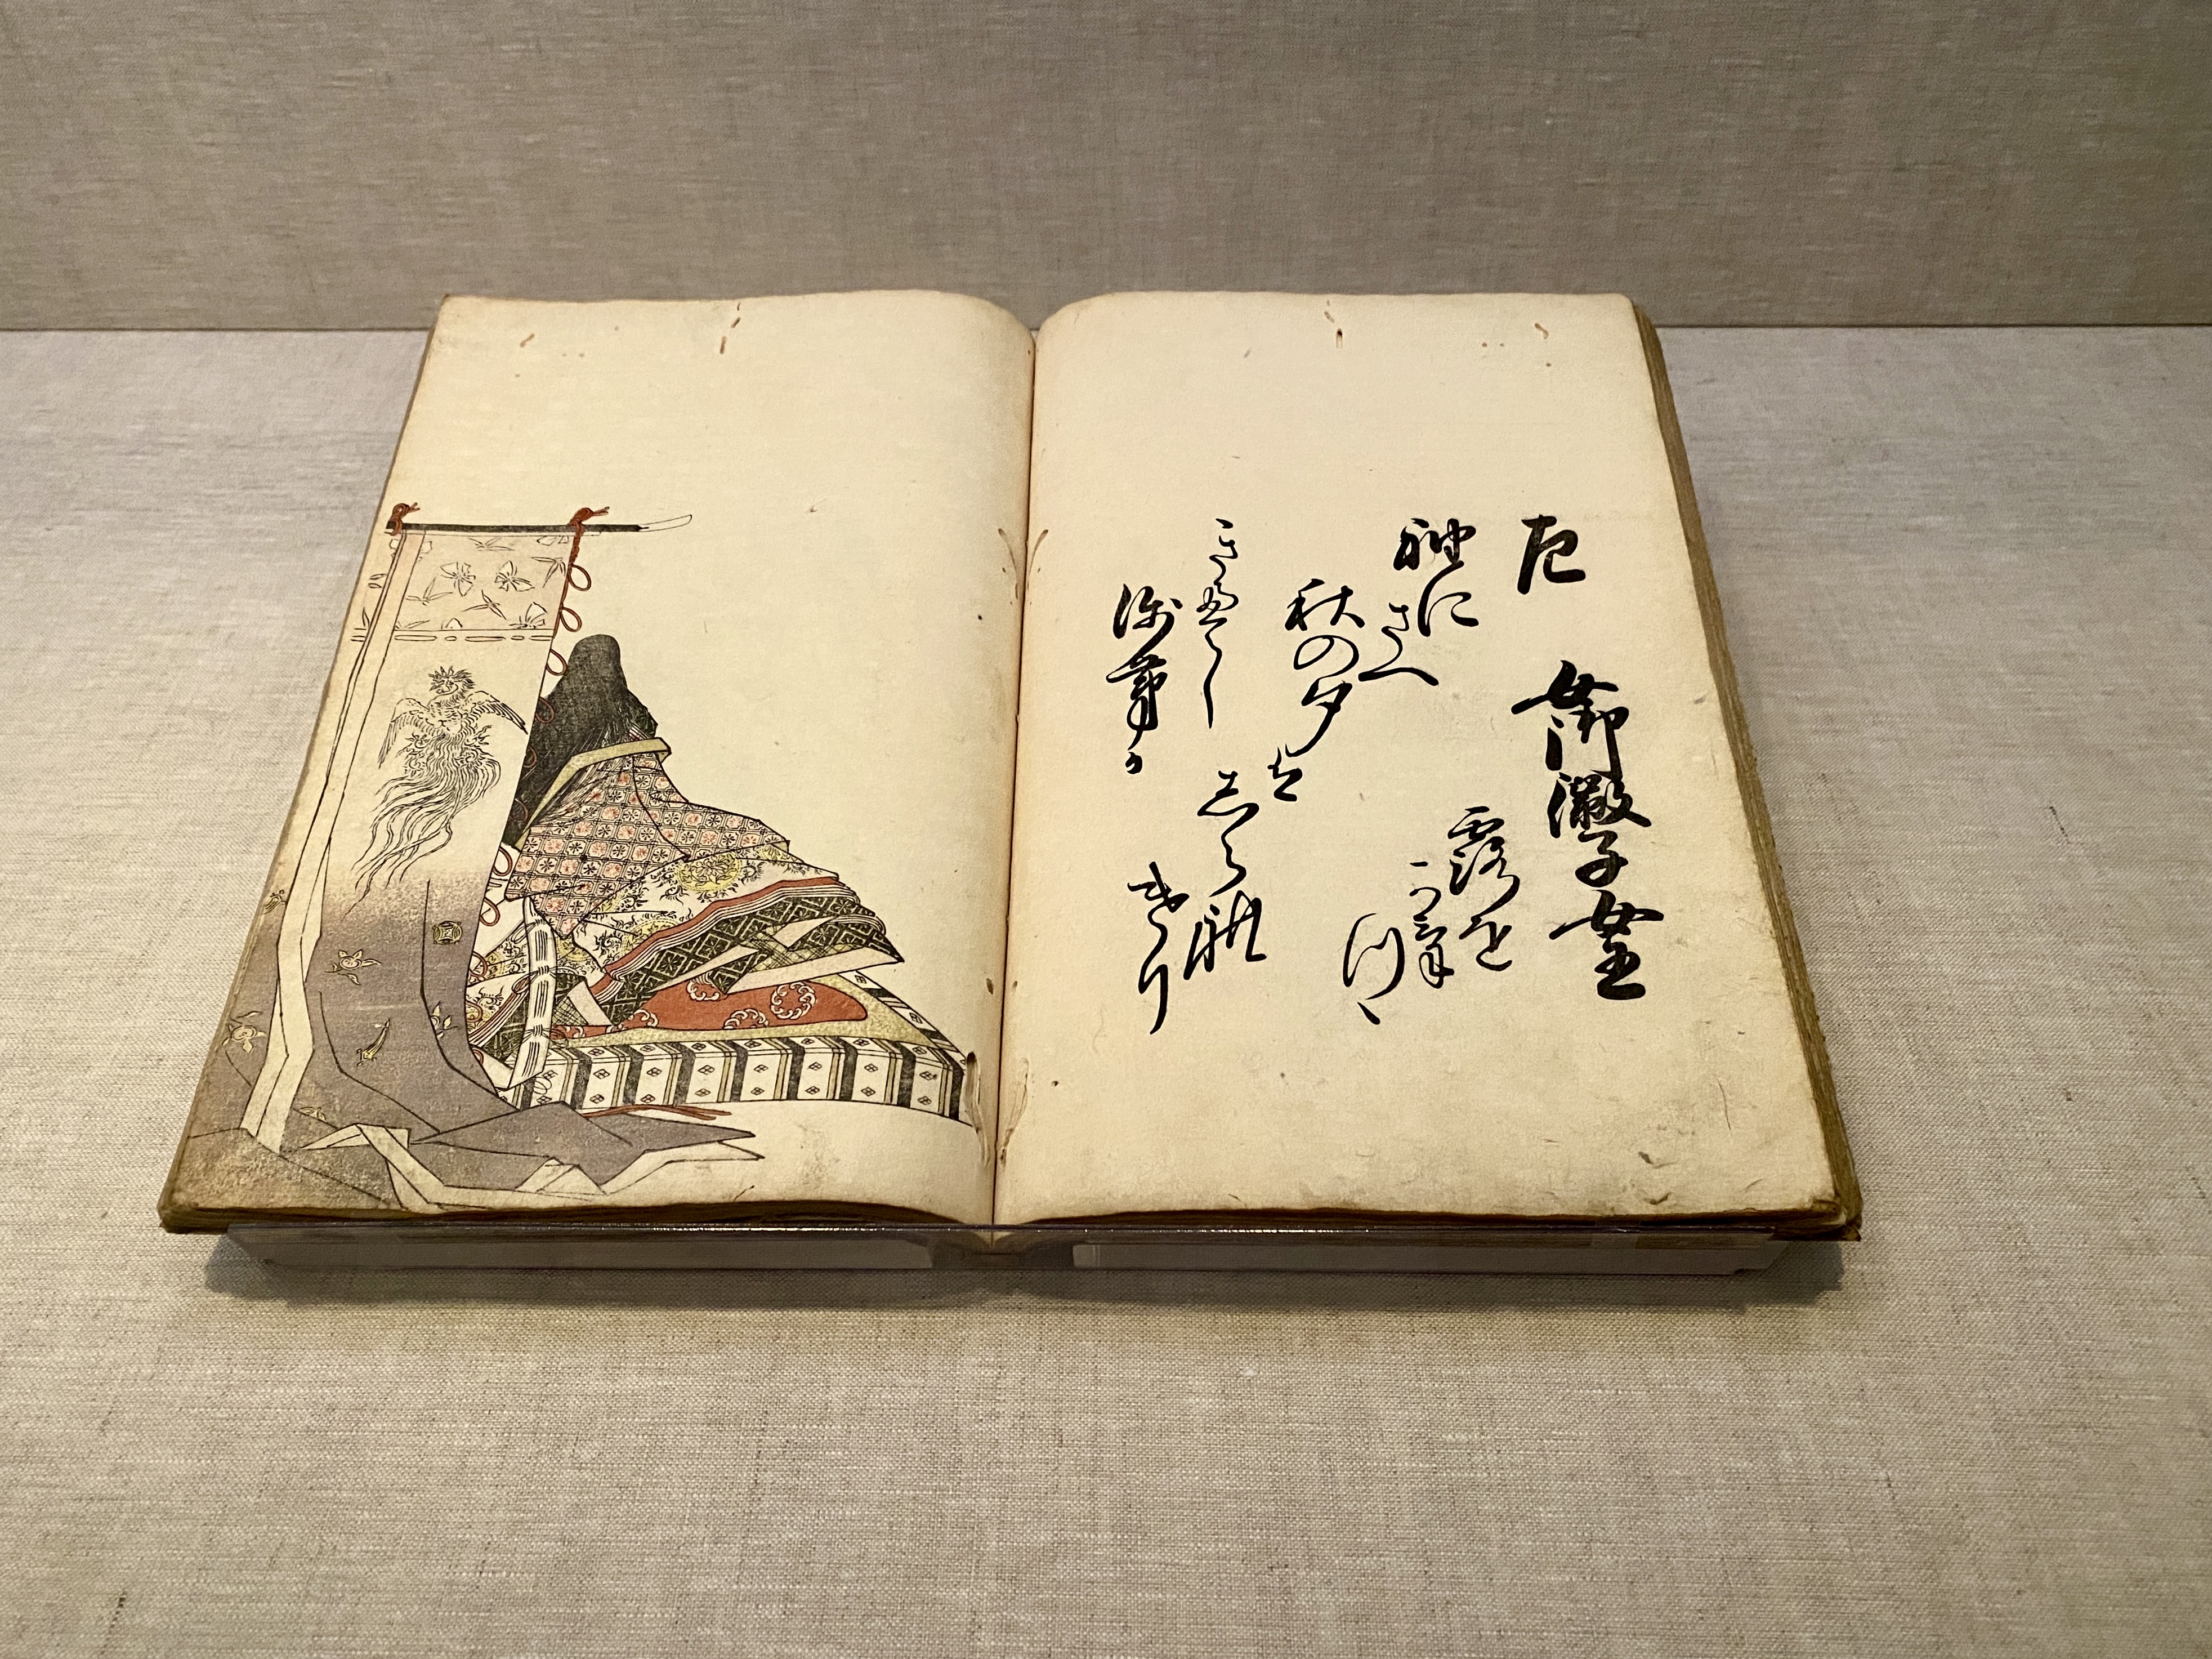 An open book with yellowed pages showing an antique illustration of Japanese banner and on the opposite page a series of Japanese characters